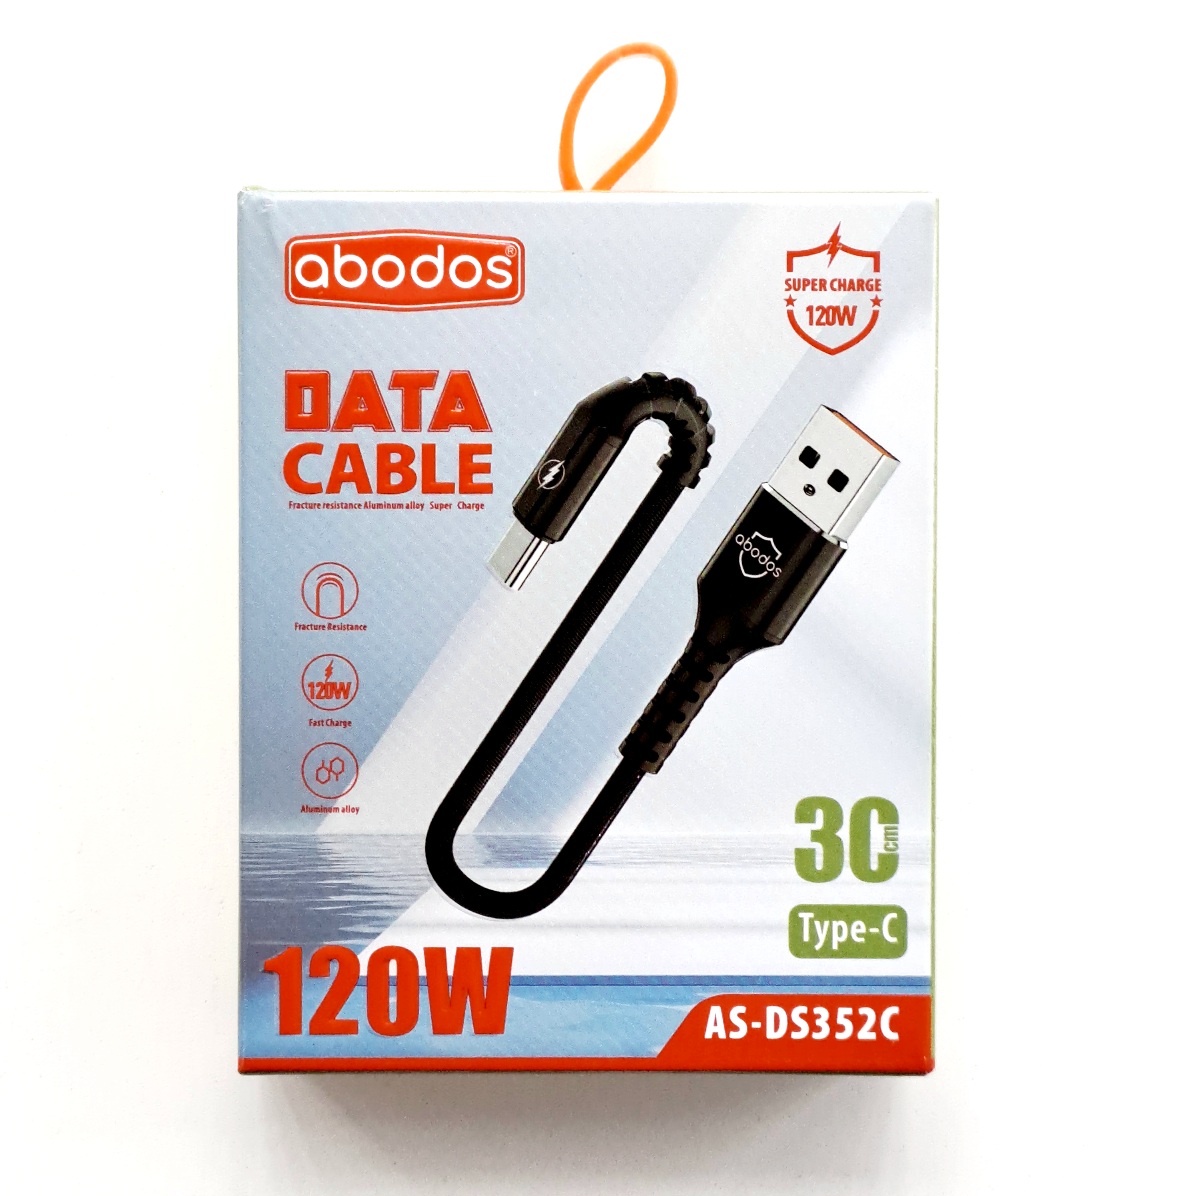 AS-DS352C abodos 120W USB to Type C Data Cable 30cm Black